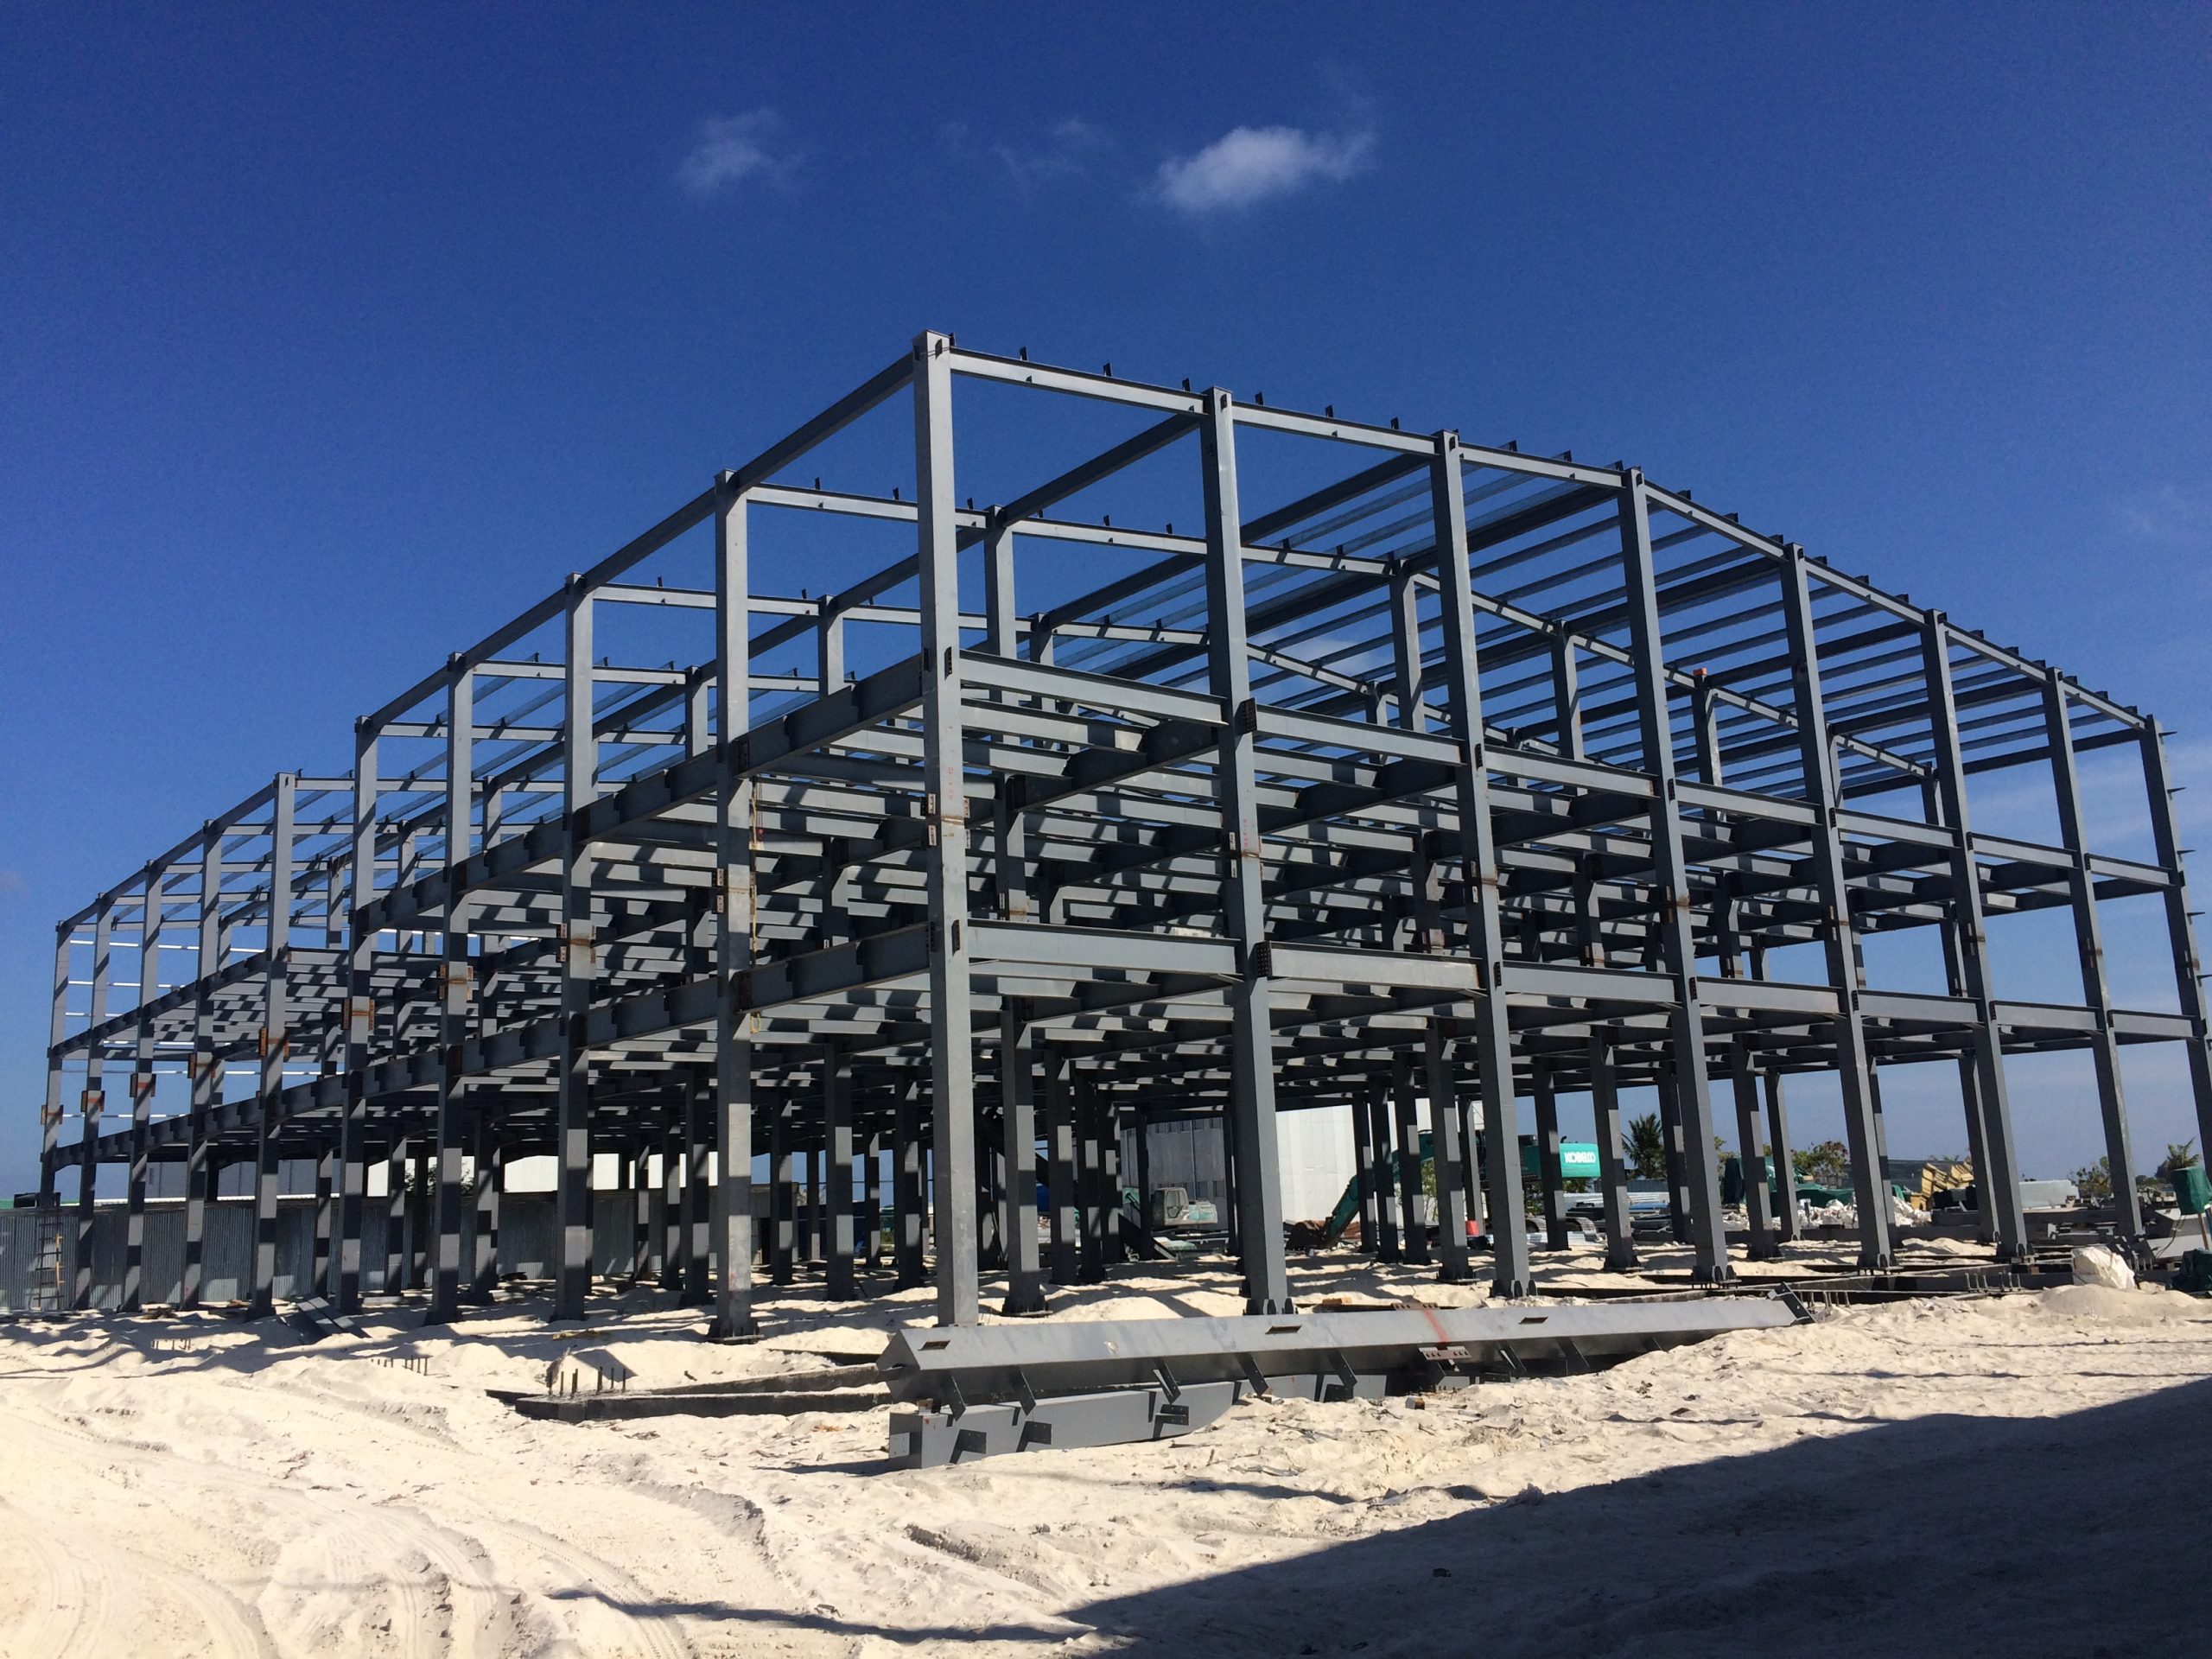 Reliable Steel Construction Methods for Withstanding Harsh Industrial Environments as Provided for Warehouses and Facilities by Lida Group